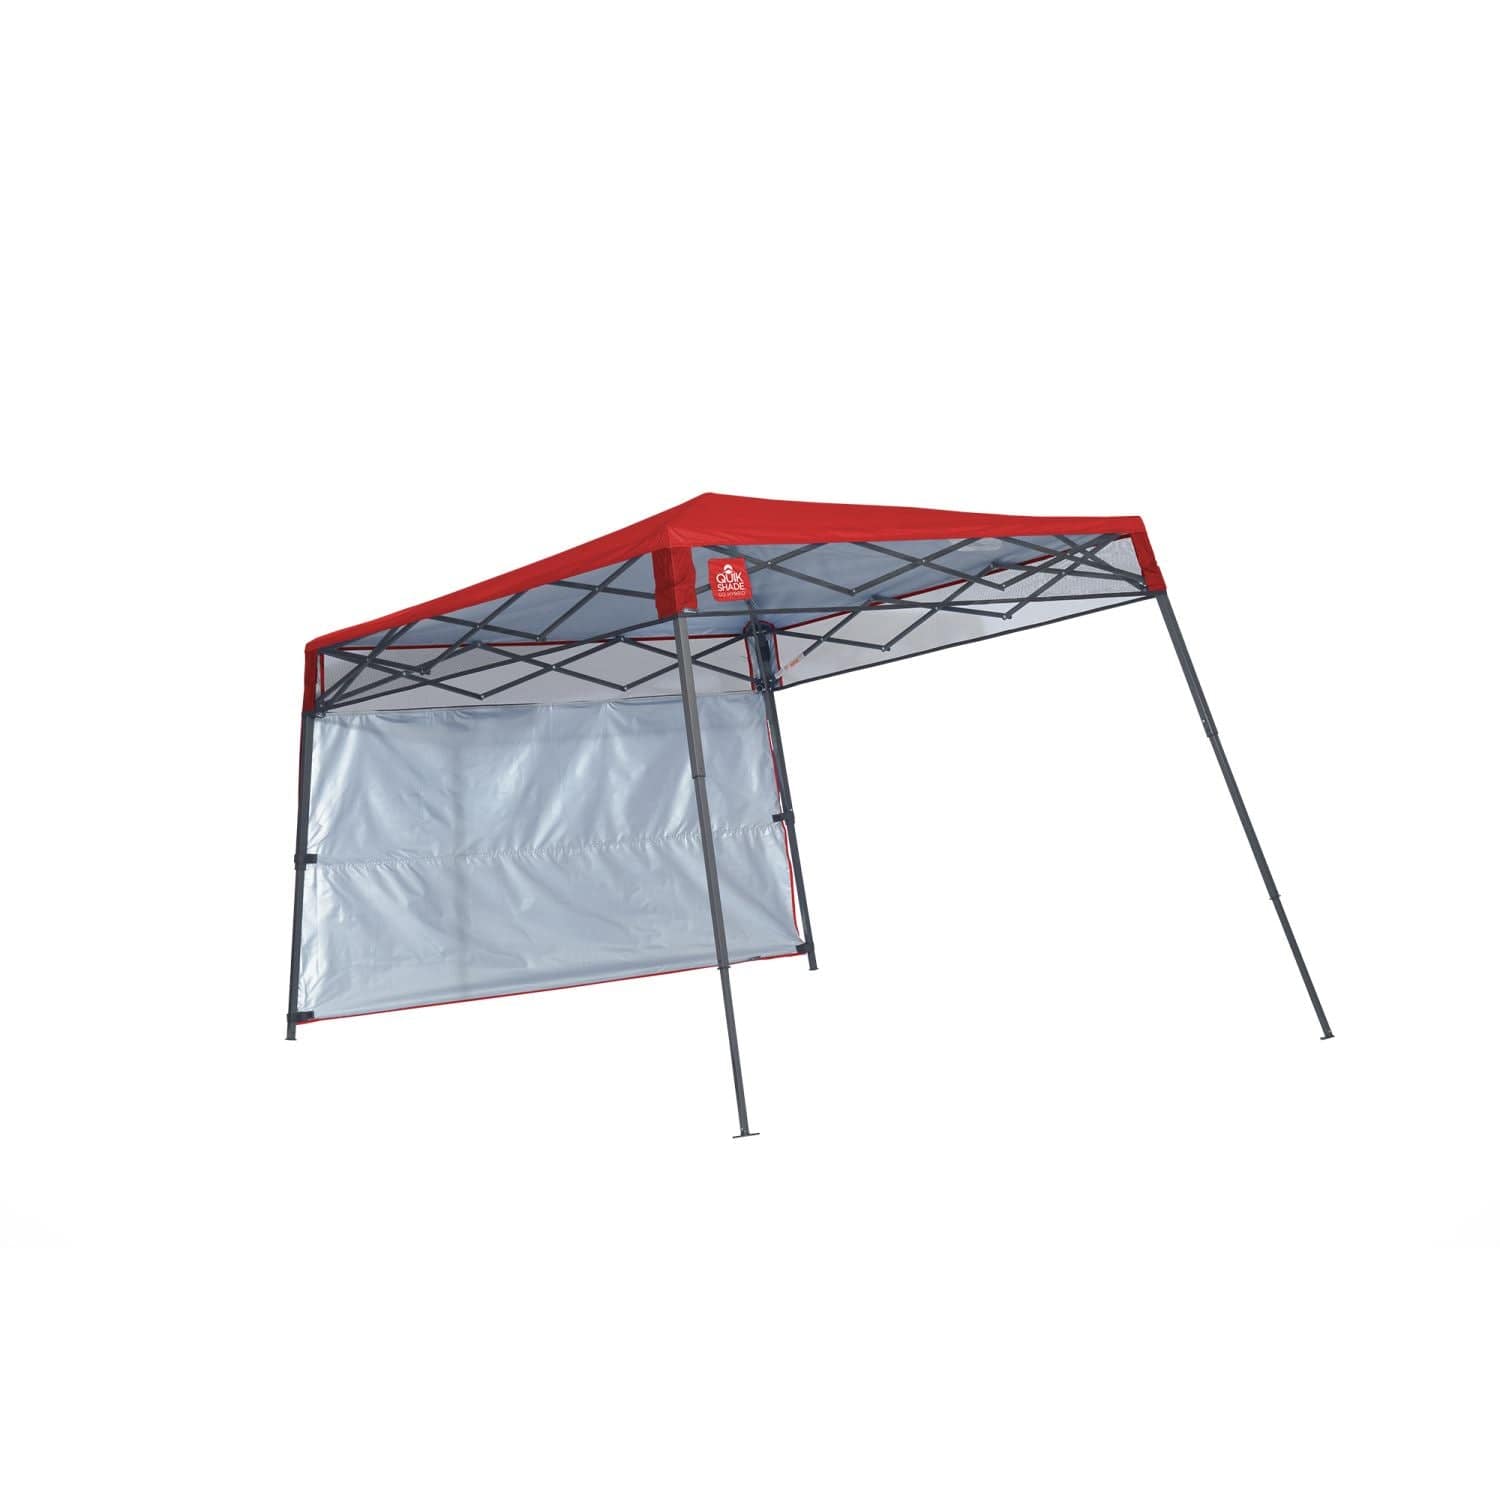 The Fulfiller Pop Up Canopies Quik Shade | Go Hybrid 6' x 6' Slant Leg Canopy - Red 167519DS